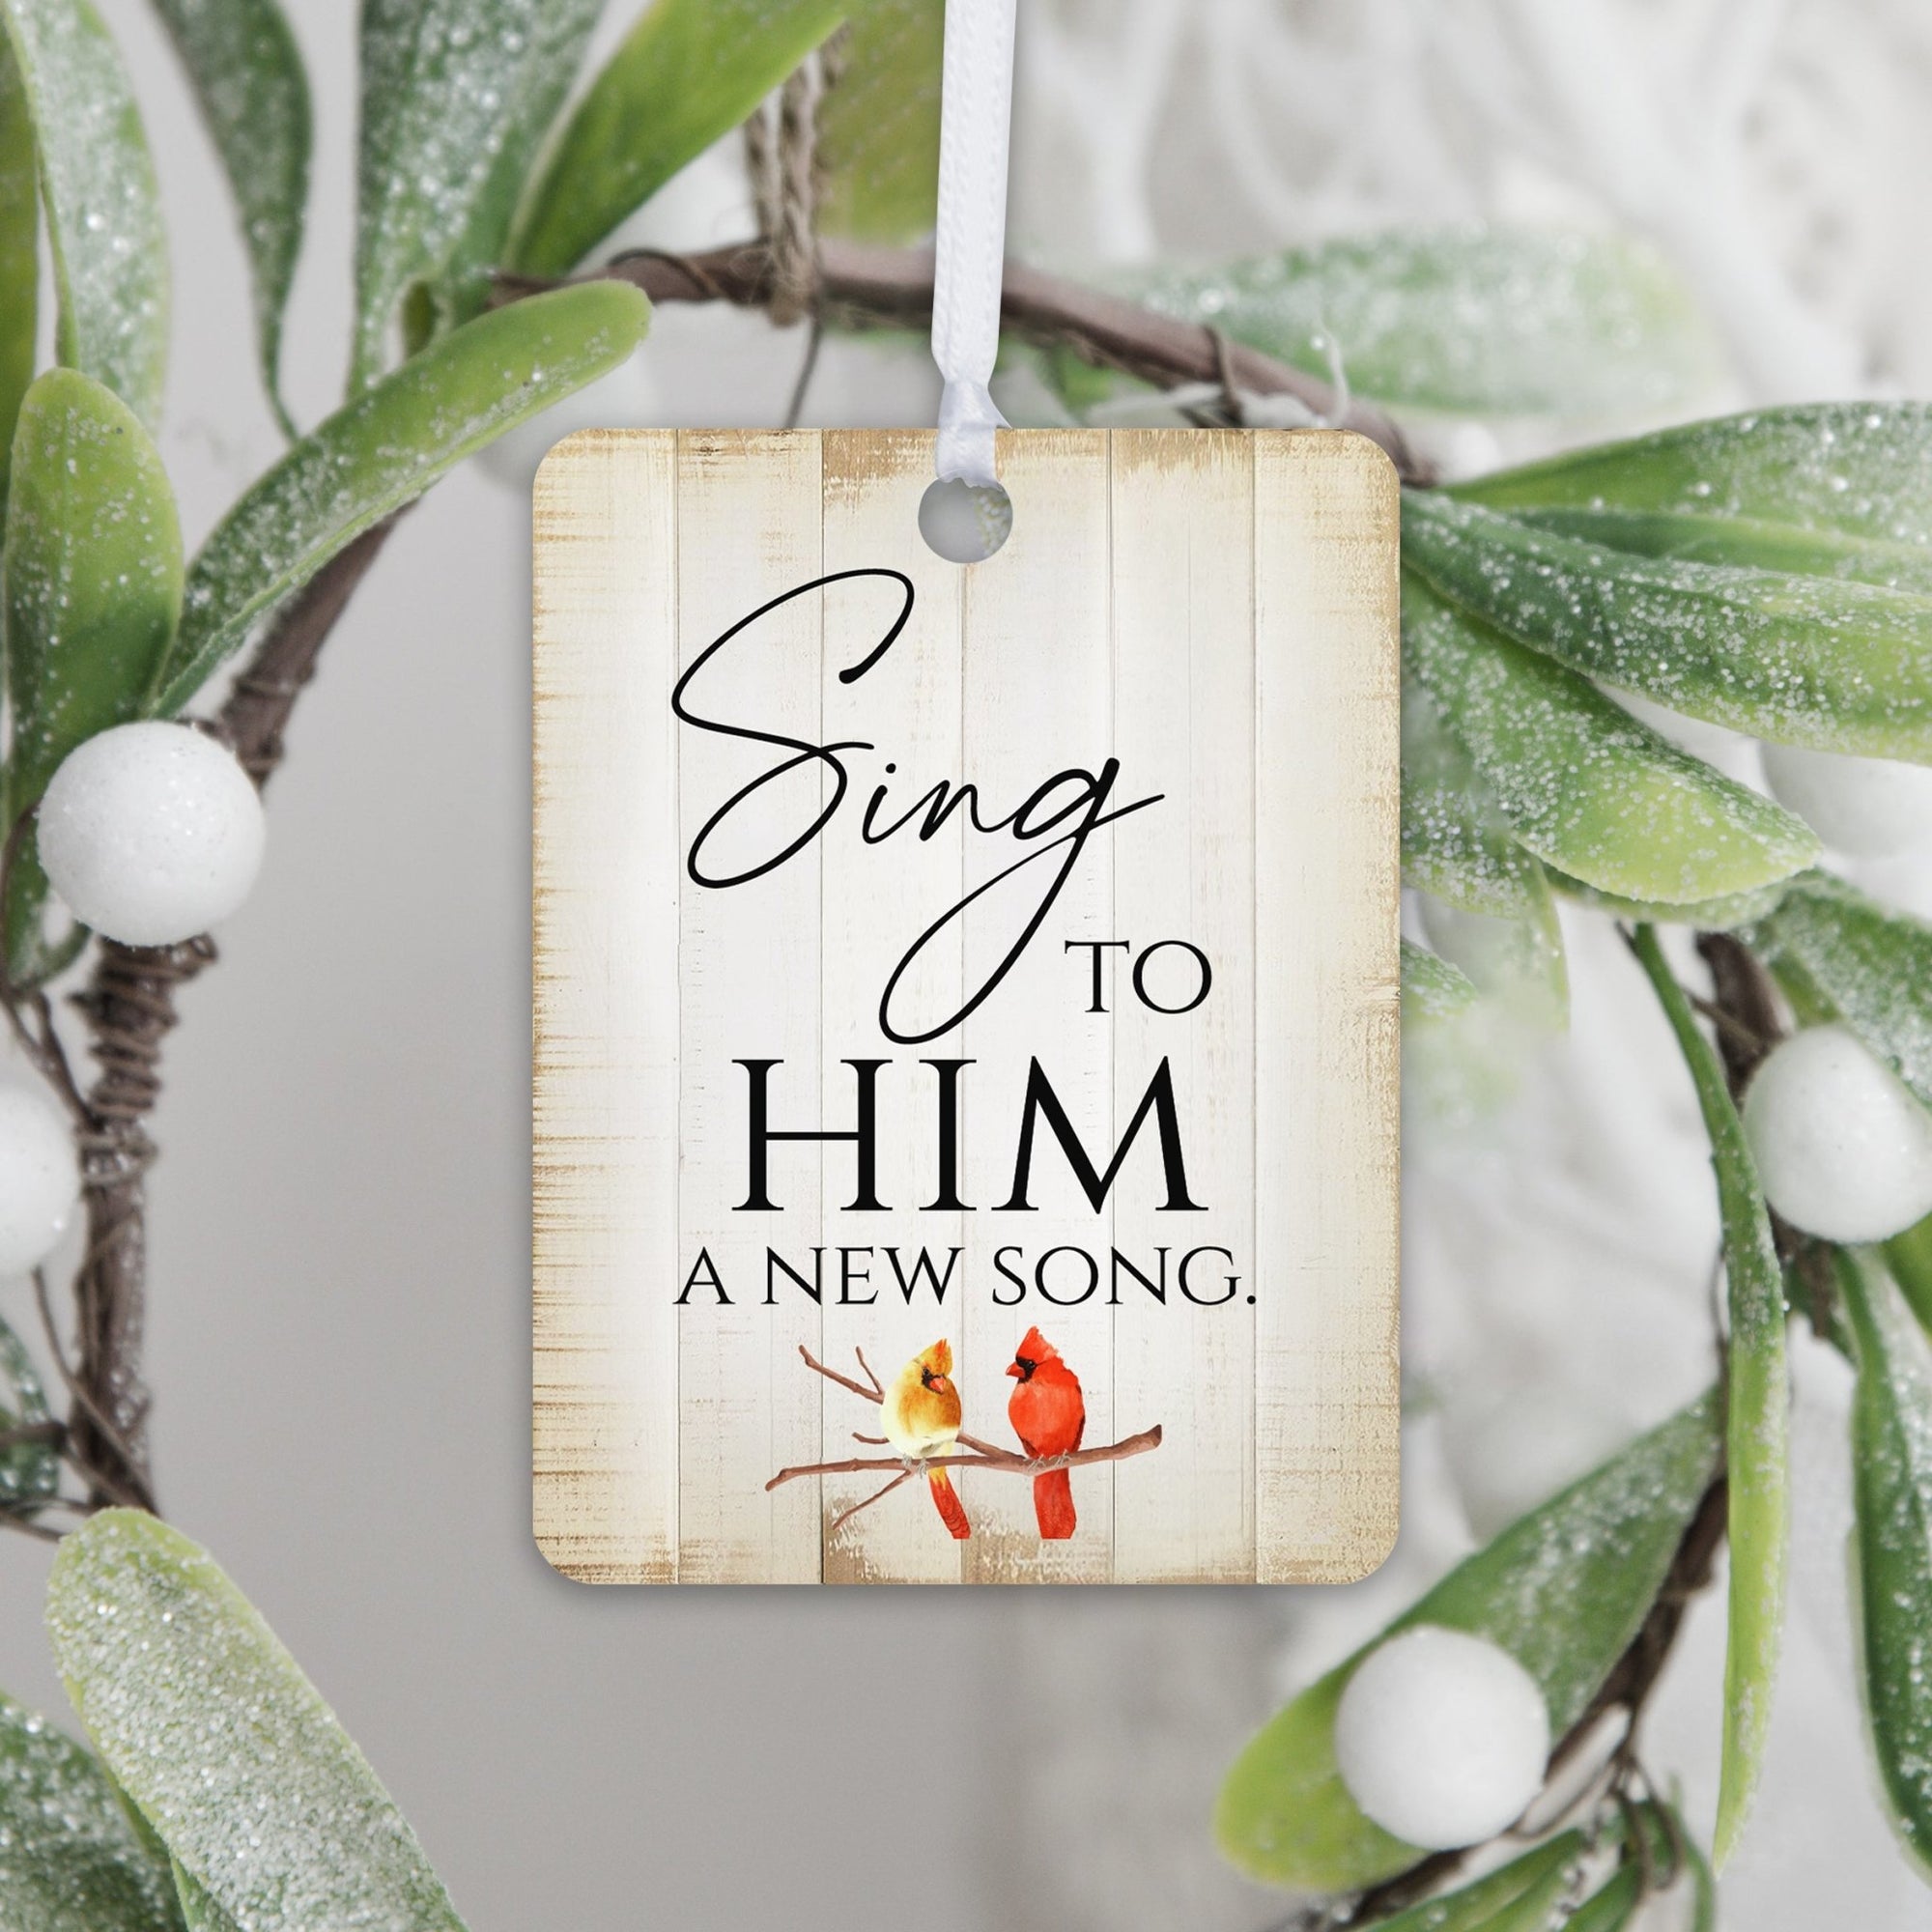 Elegant Vertical Cardinal Wooden Ornament With Everyday Verses Gift Ideas - Sing To Him